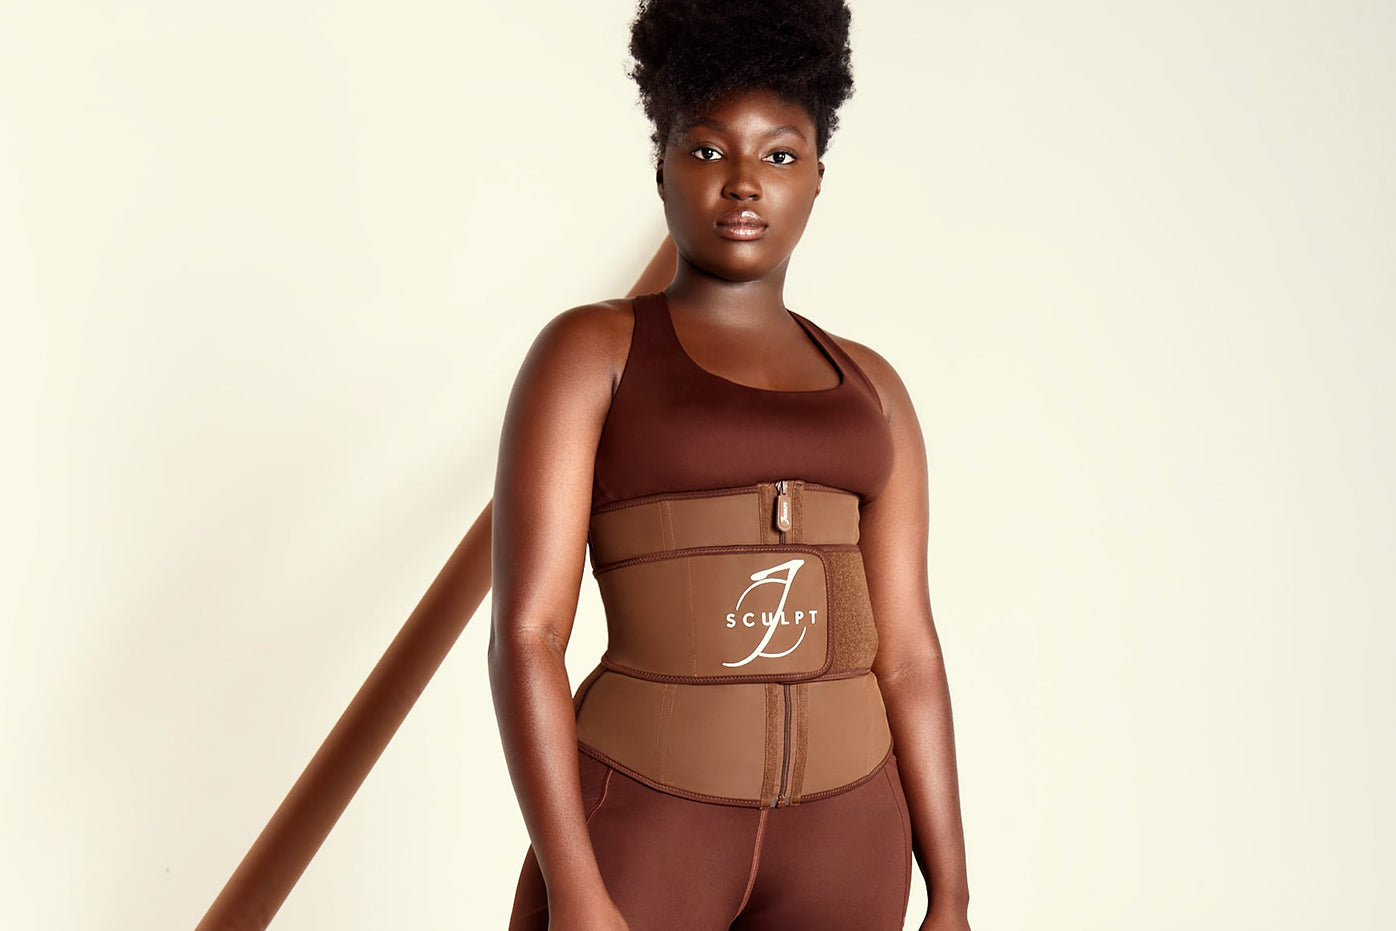 Shop4fun.online - Must read this Jsculpt waist trainer reviews and their  results before decide to purchase. There have many options better than  jsculpt fitness.